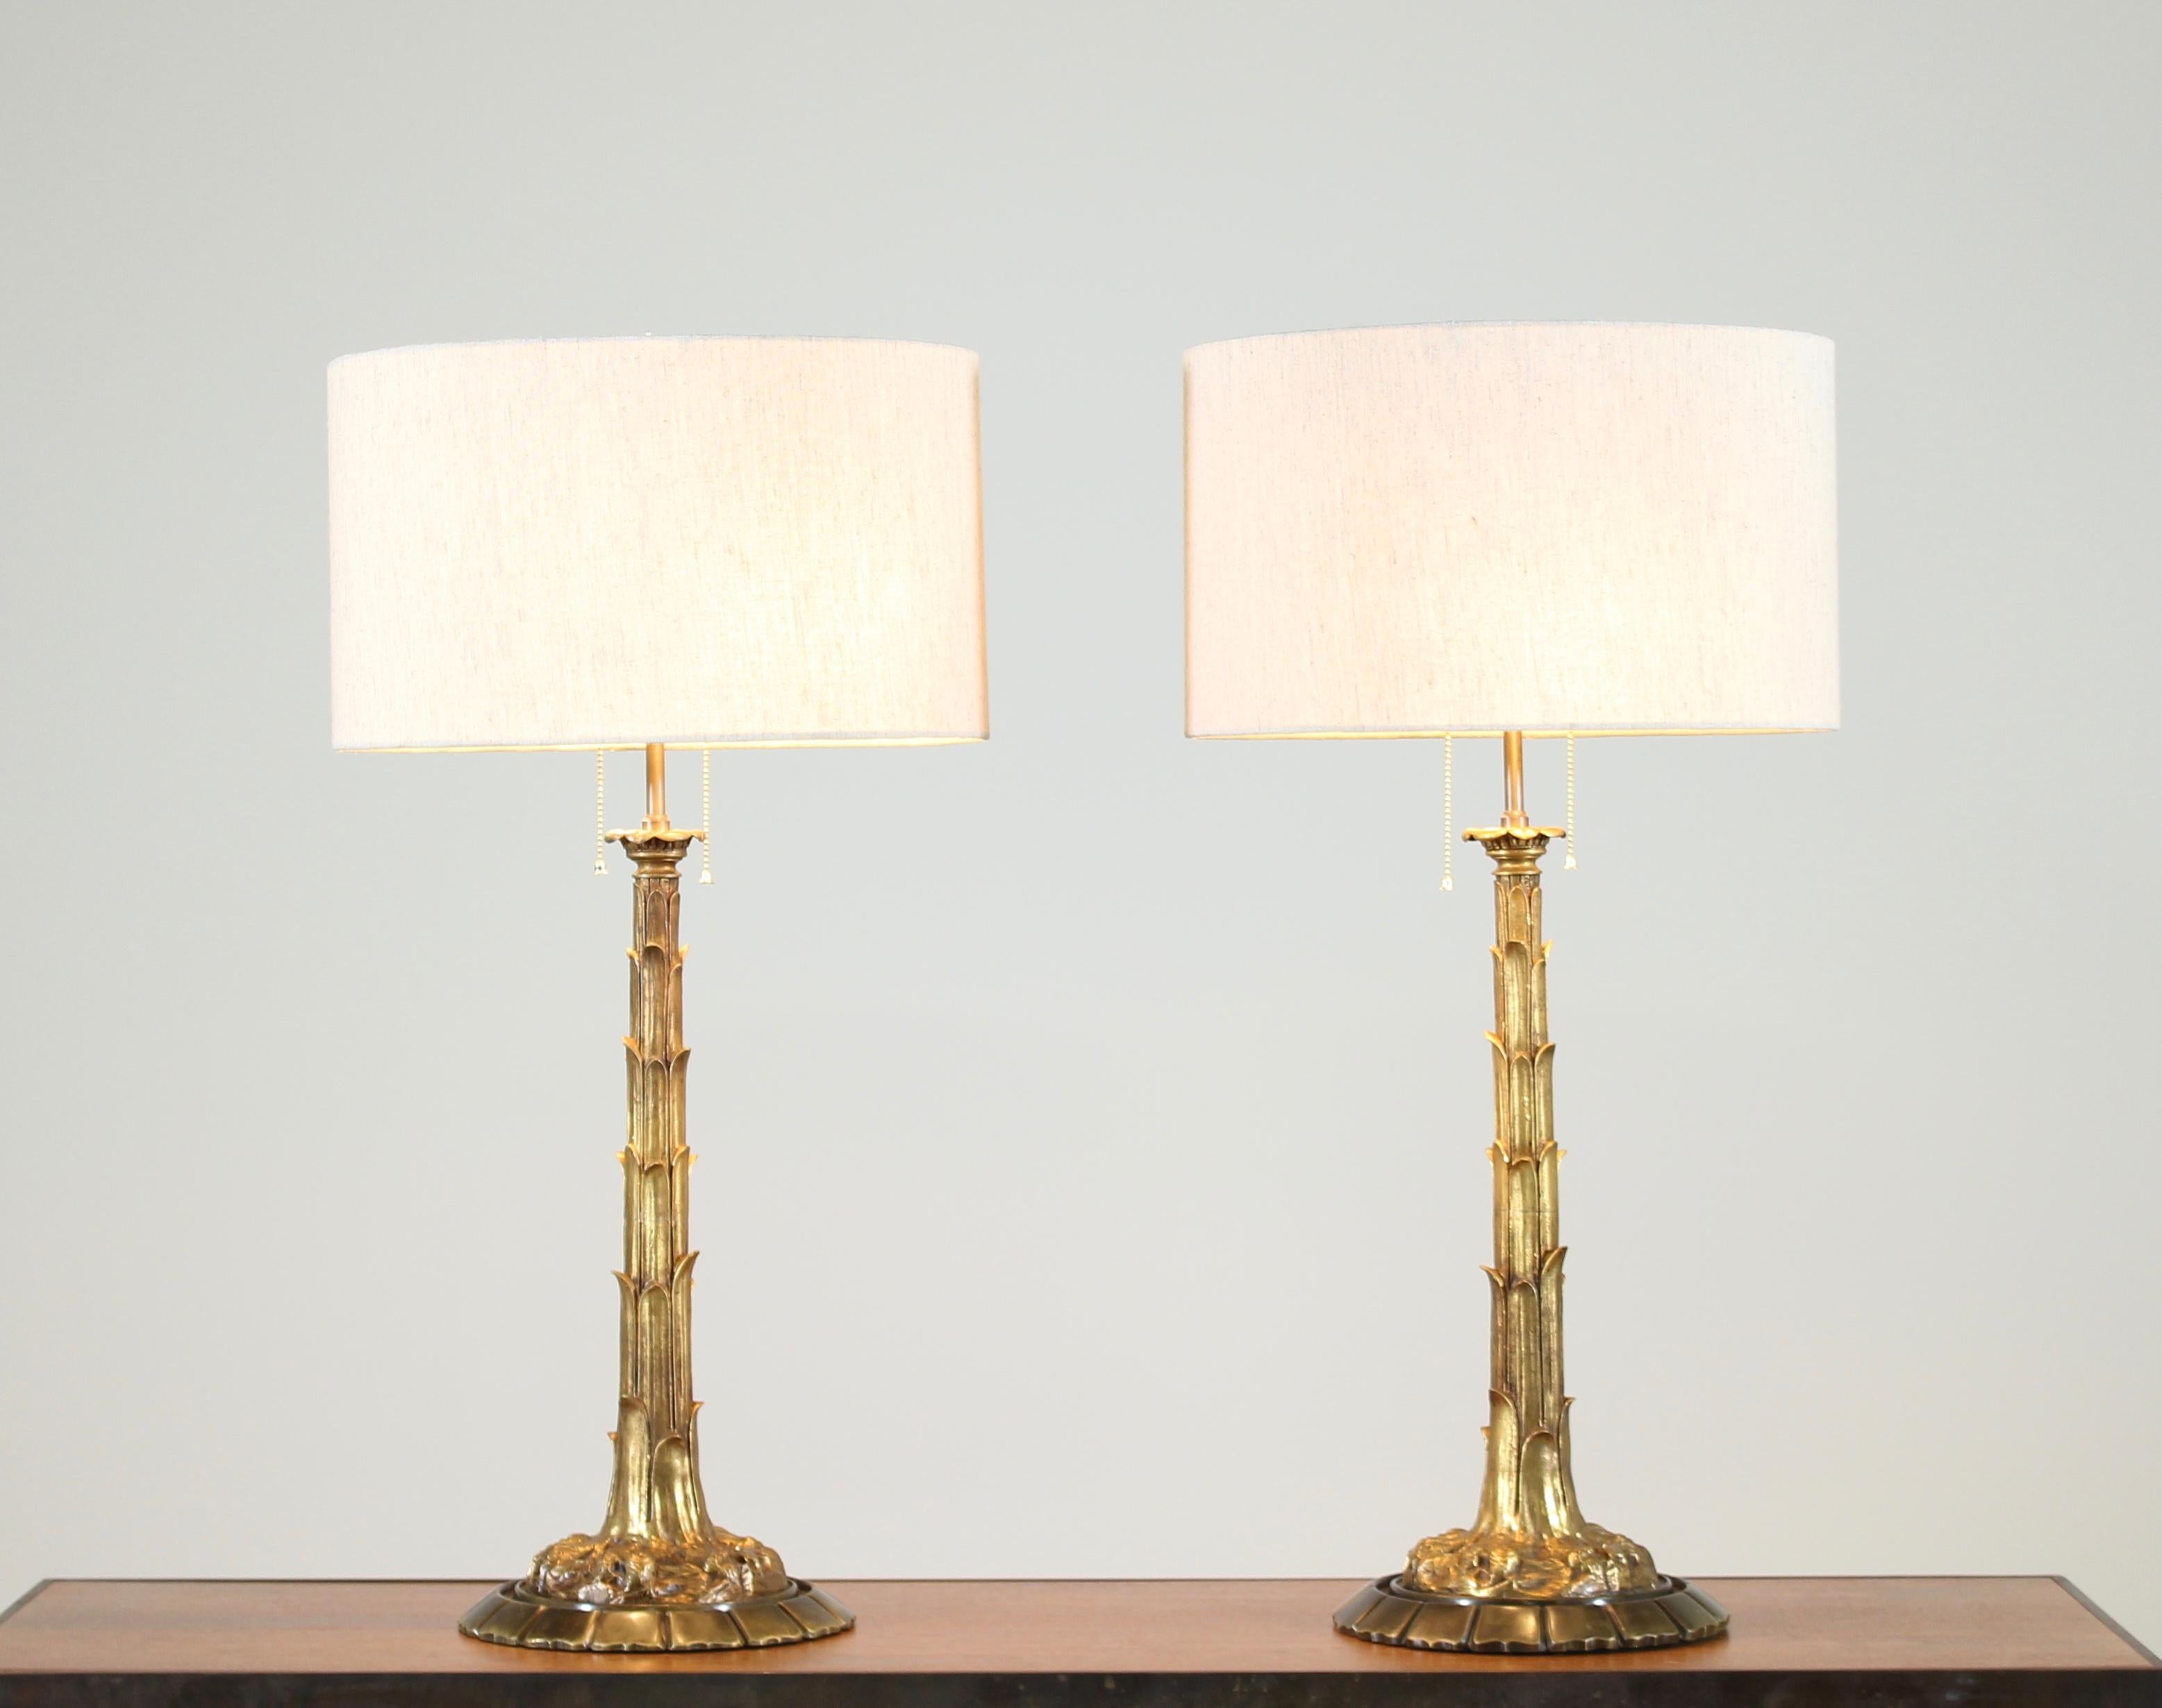 Sophisticated, pair of 1940s French bronze-doré palm tree table lamps mounted on contrasting bronze bases. These wonderful and high quality lamps bring to mind the iconic designs of the magnificent French designer Serge Roché. Wired and in working